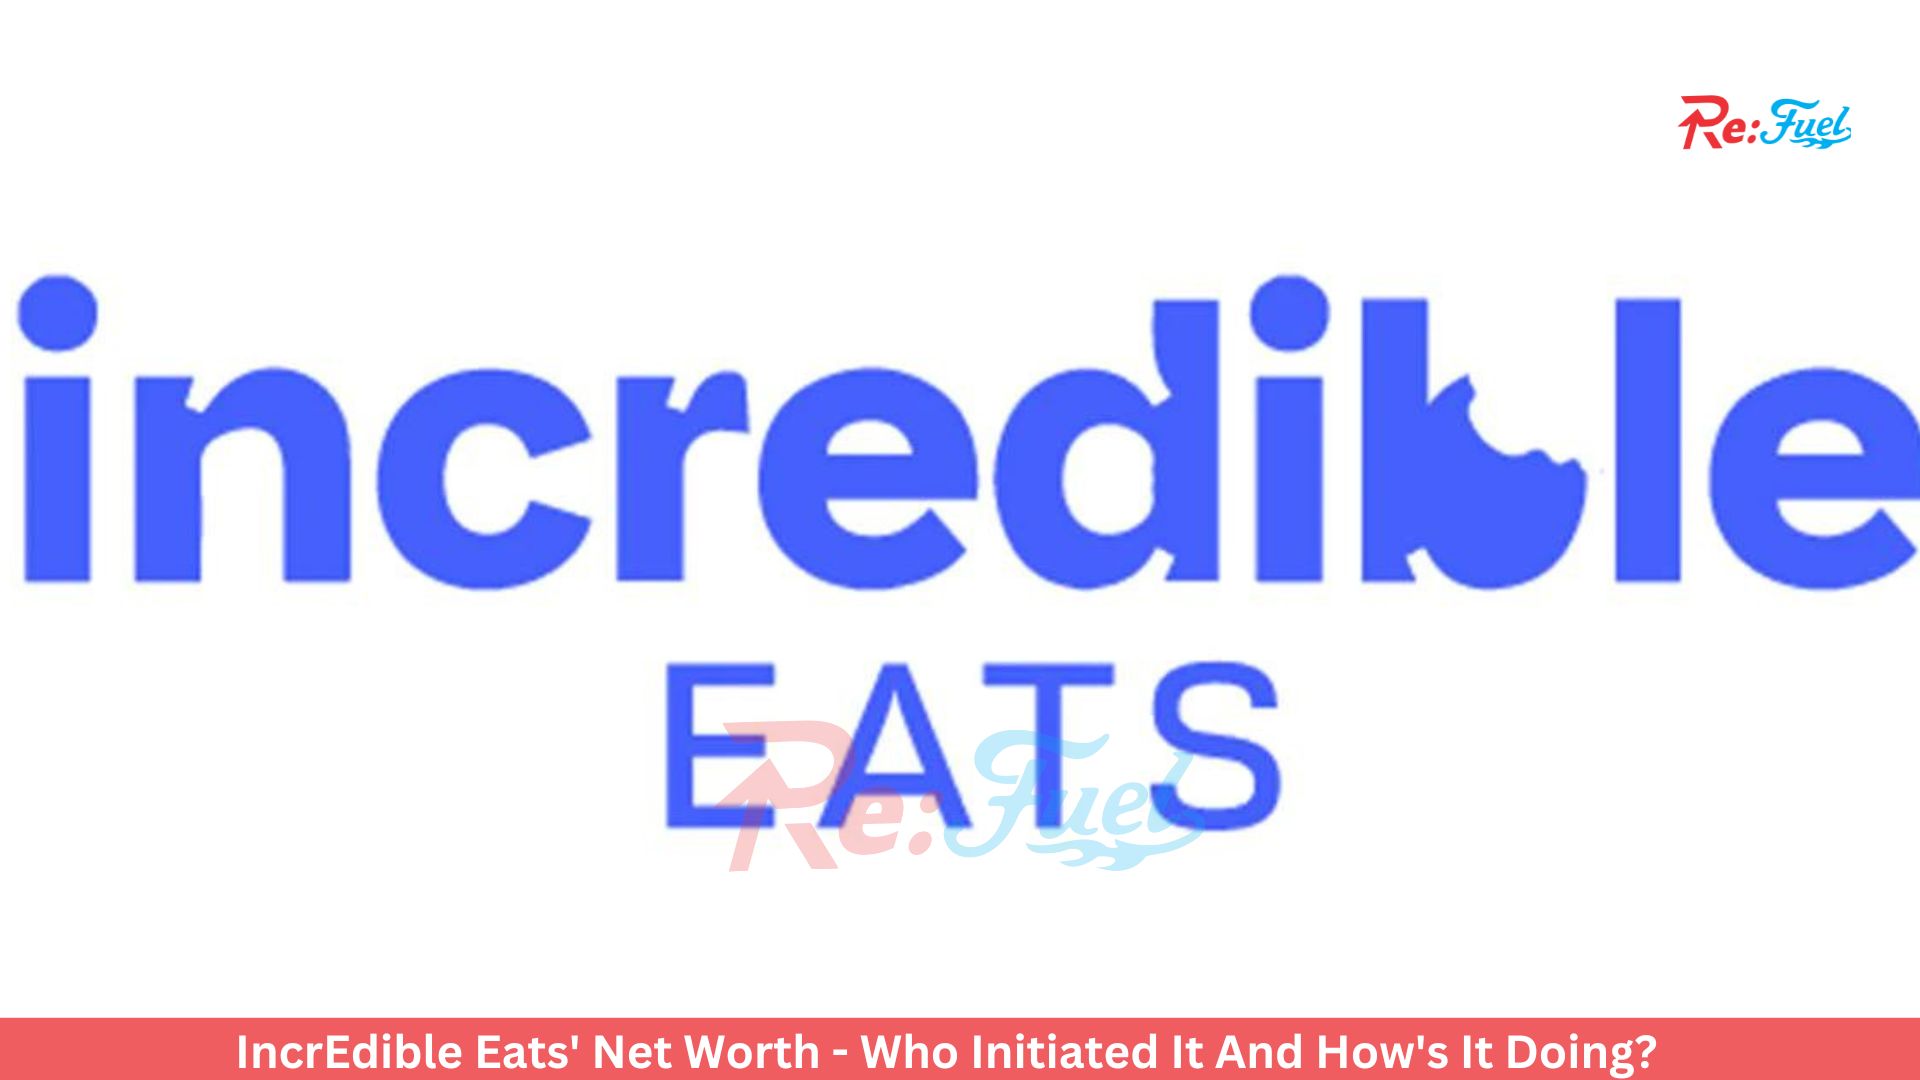 IncrEdible Eats' Net Worth - Who Initiated It And How's It Doing?